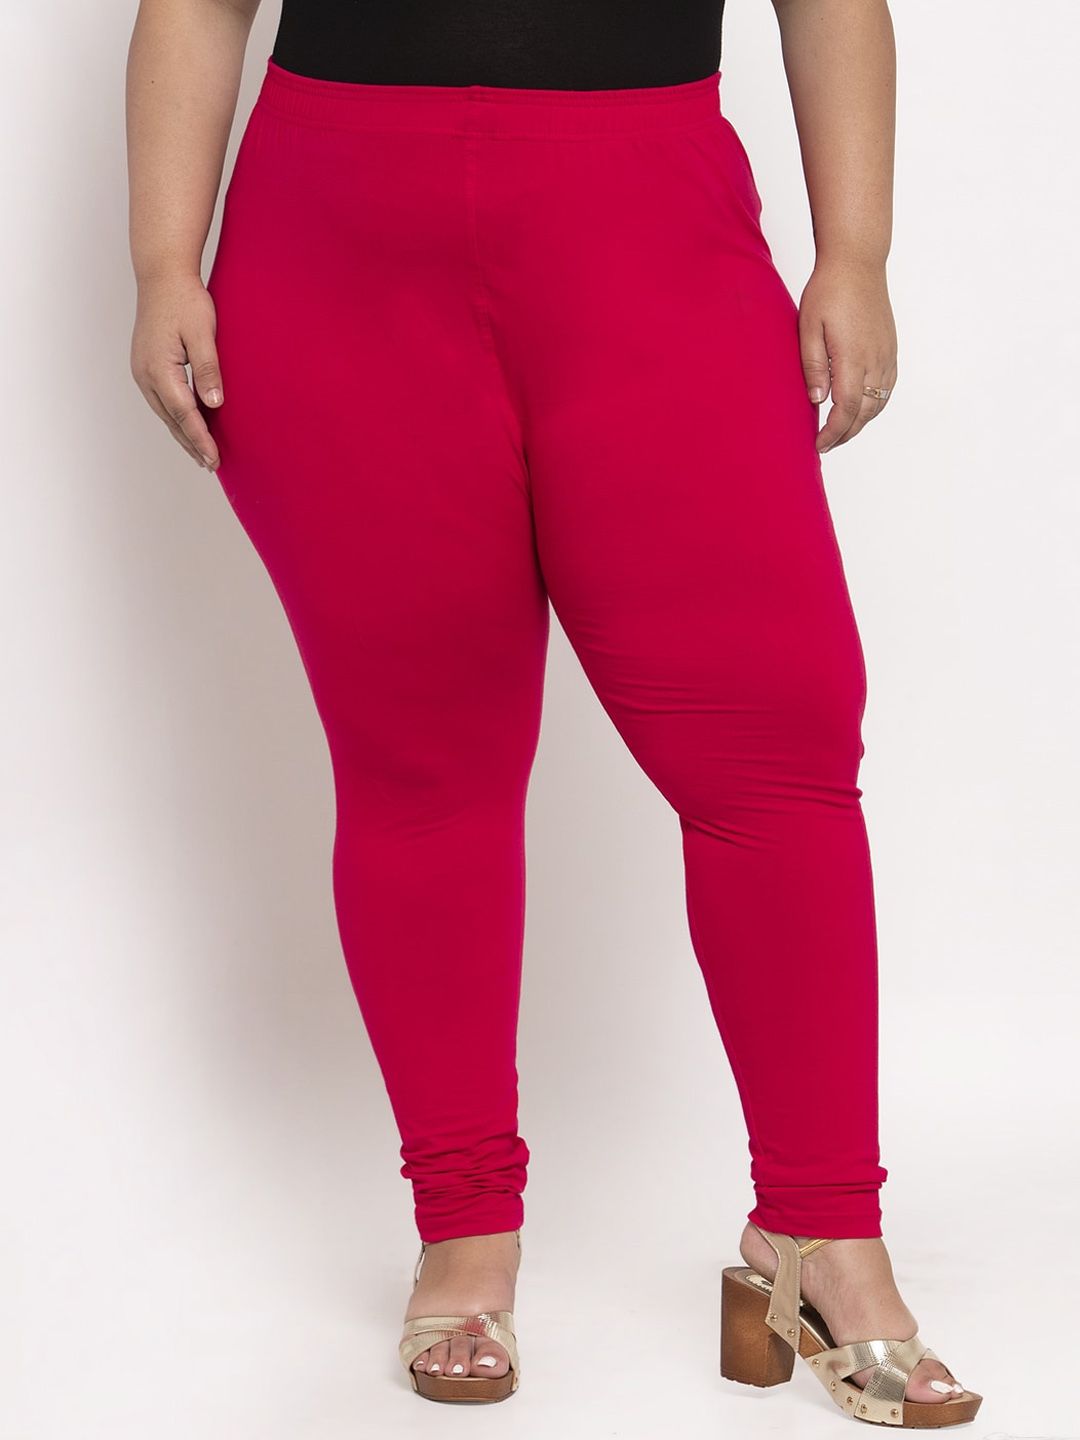 TAG 7 PLUS Women Pink Solid Ankle-Length Plus Size Leggings Price in India